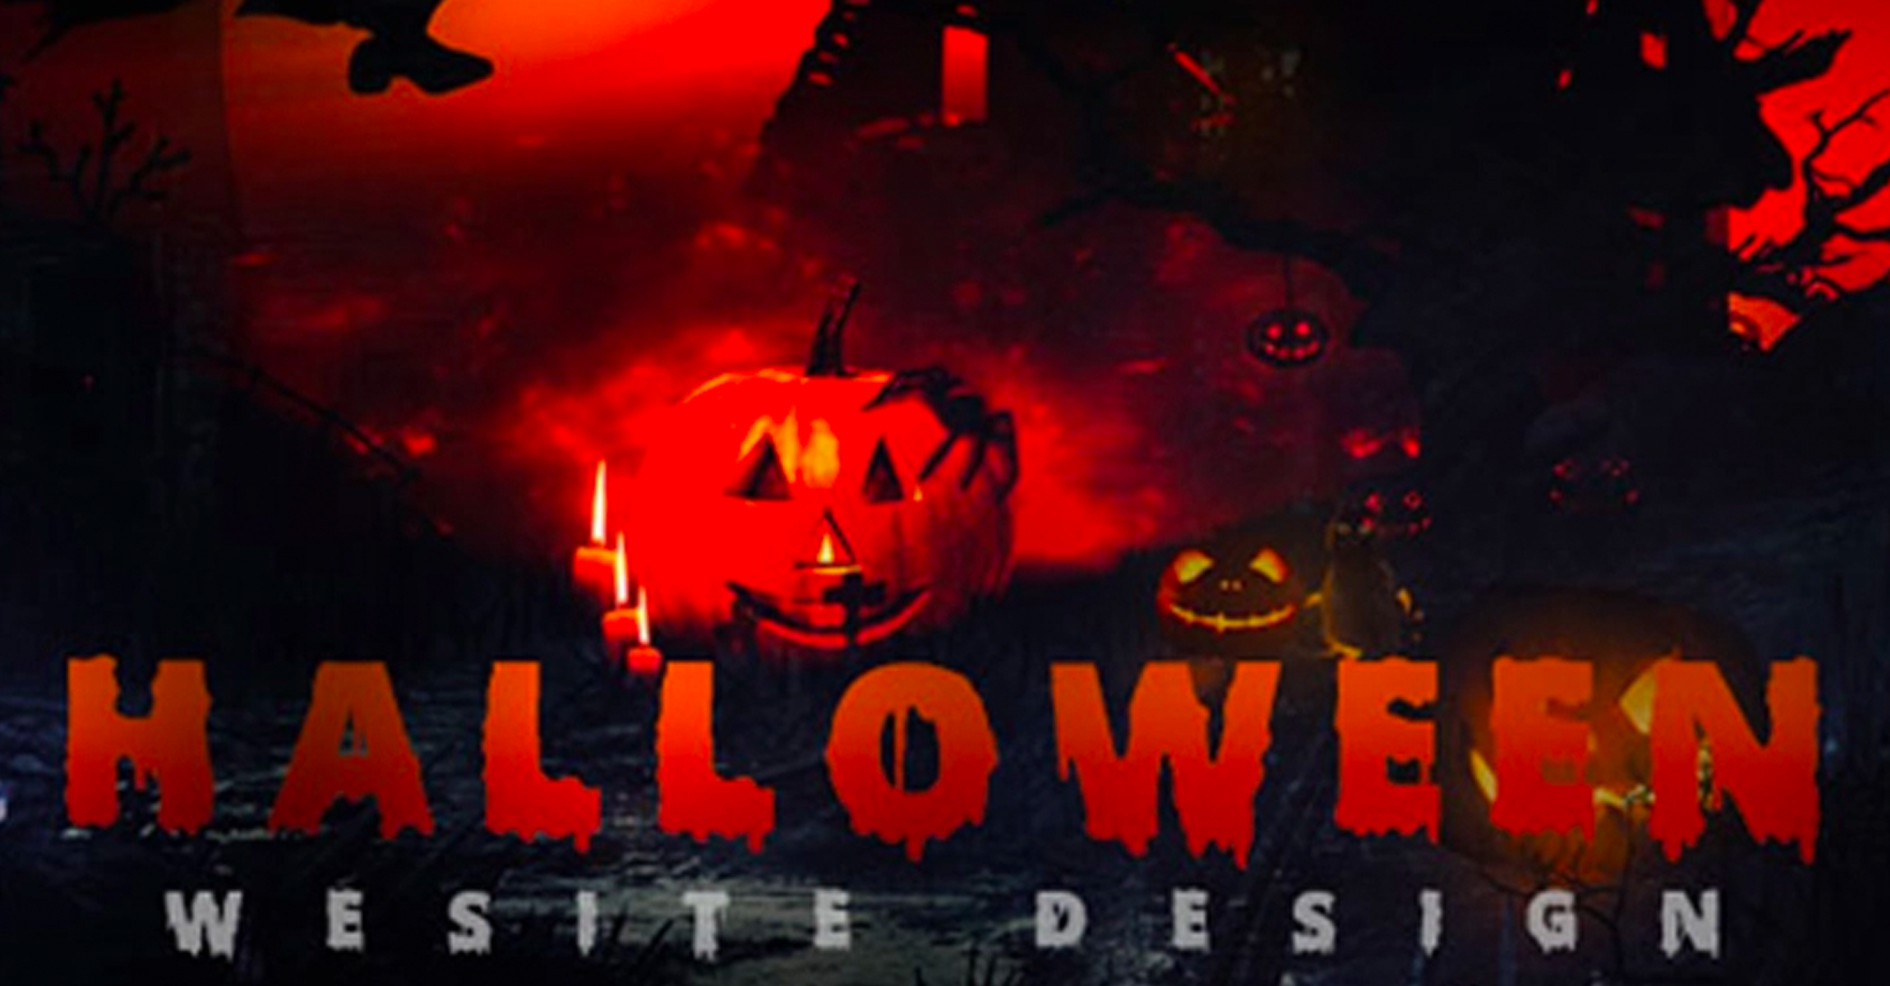 Website Design Trends That You Should Look For This Halloween